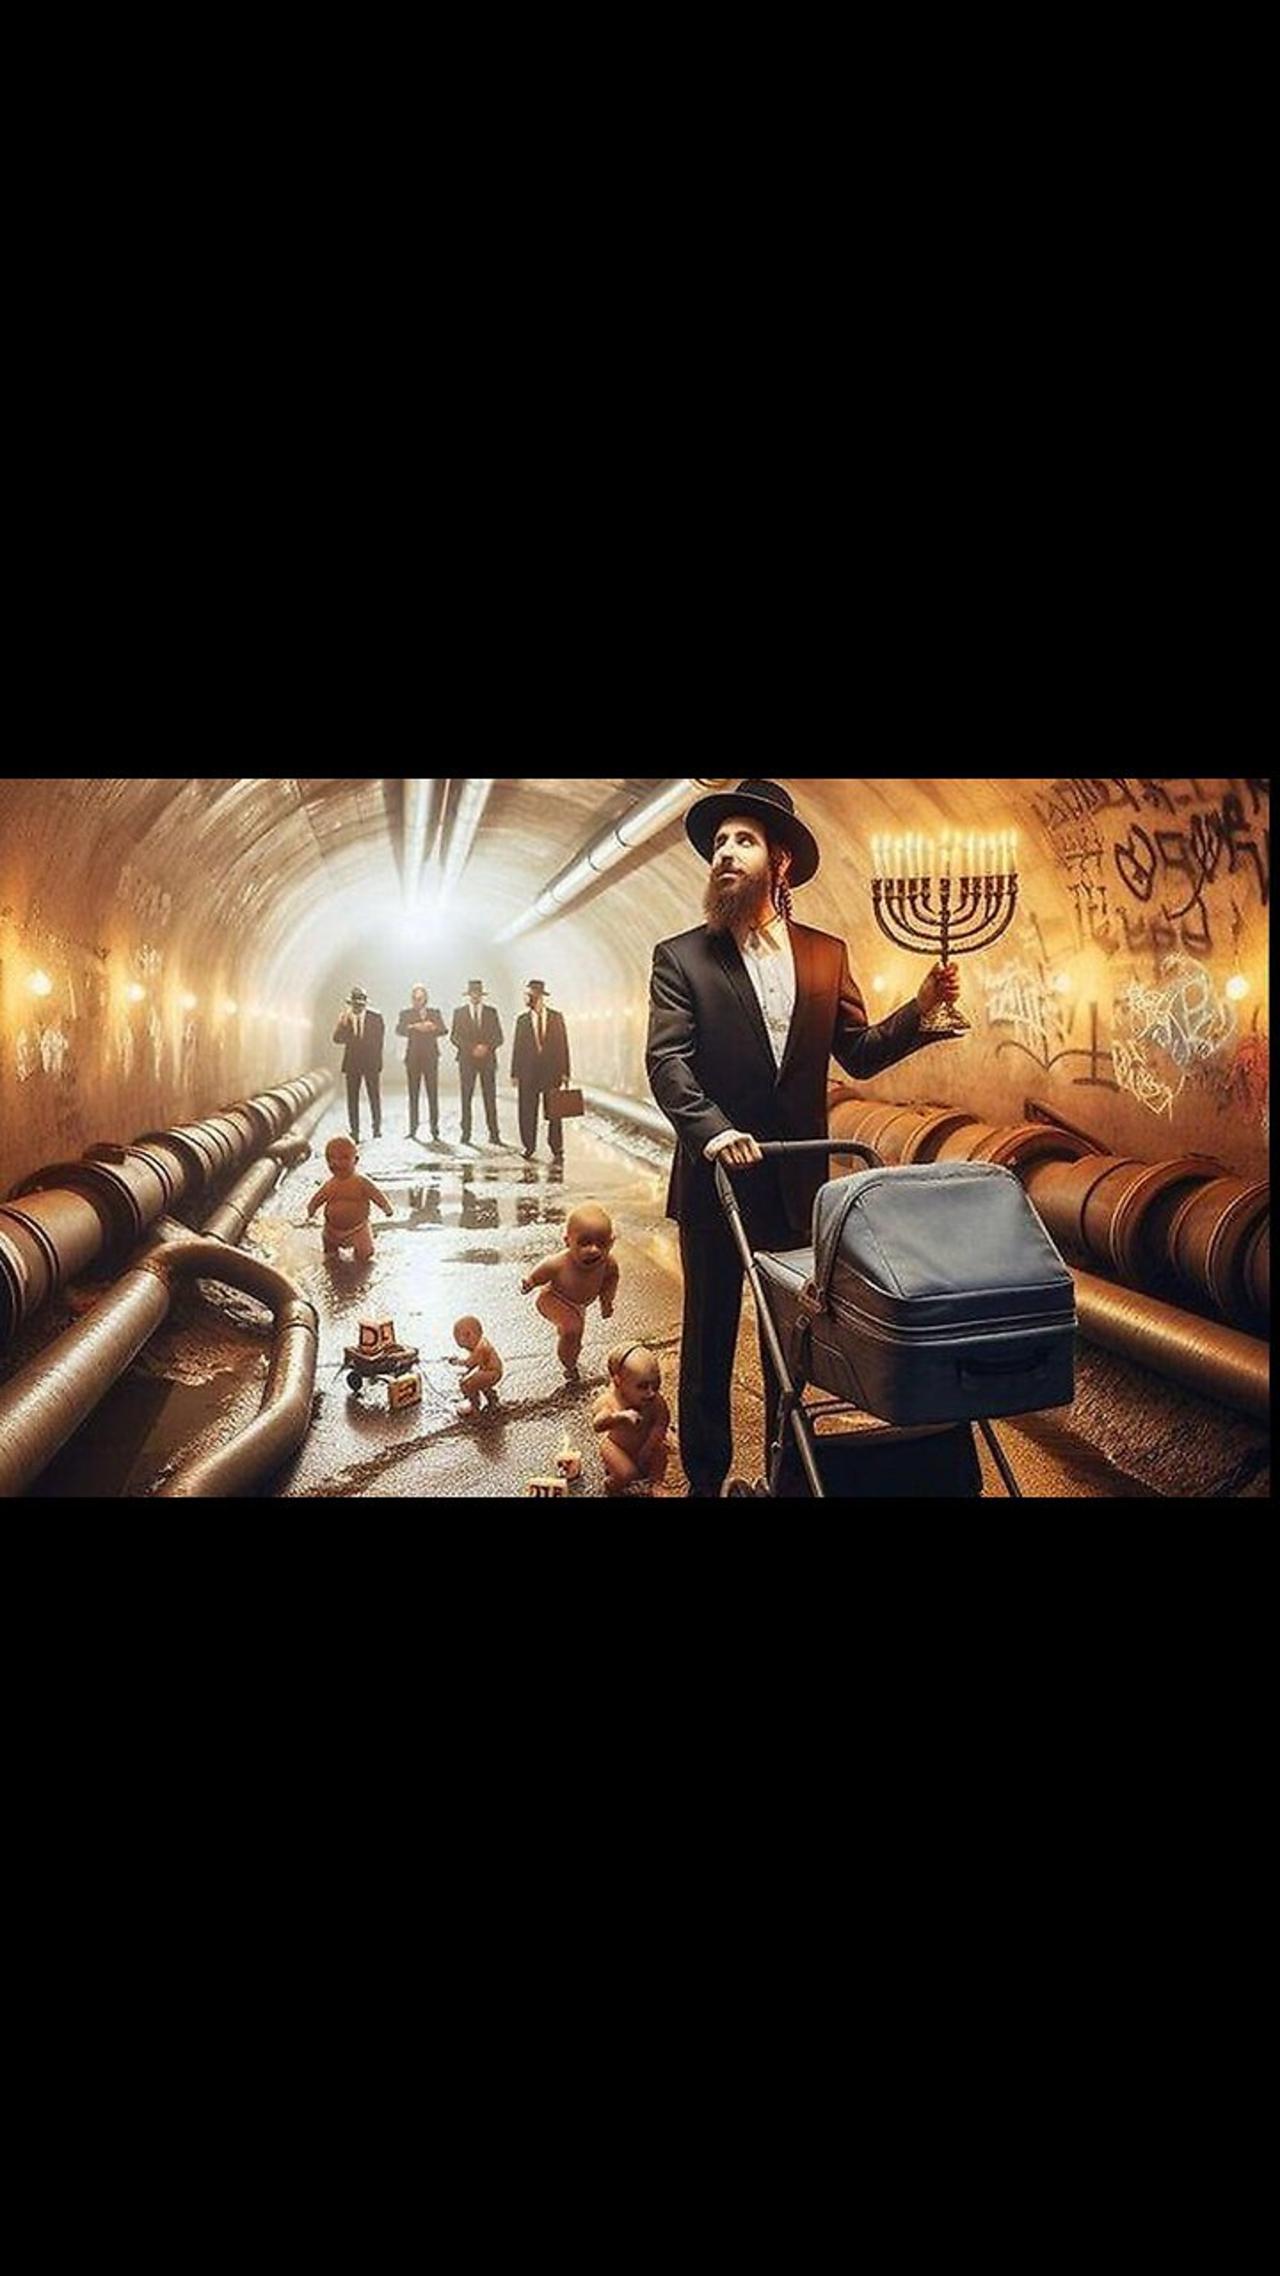 Chabad Lubavitch Jewish Headquarters in NY City has Underground Tunnels with several Baby Chairs!